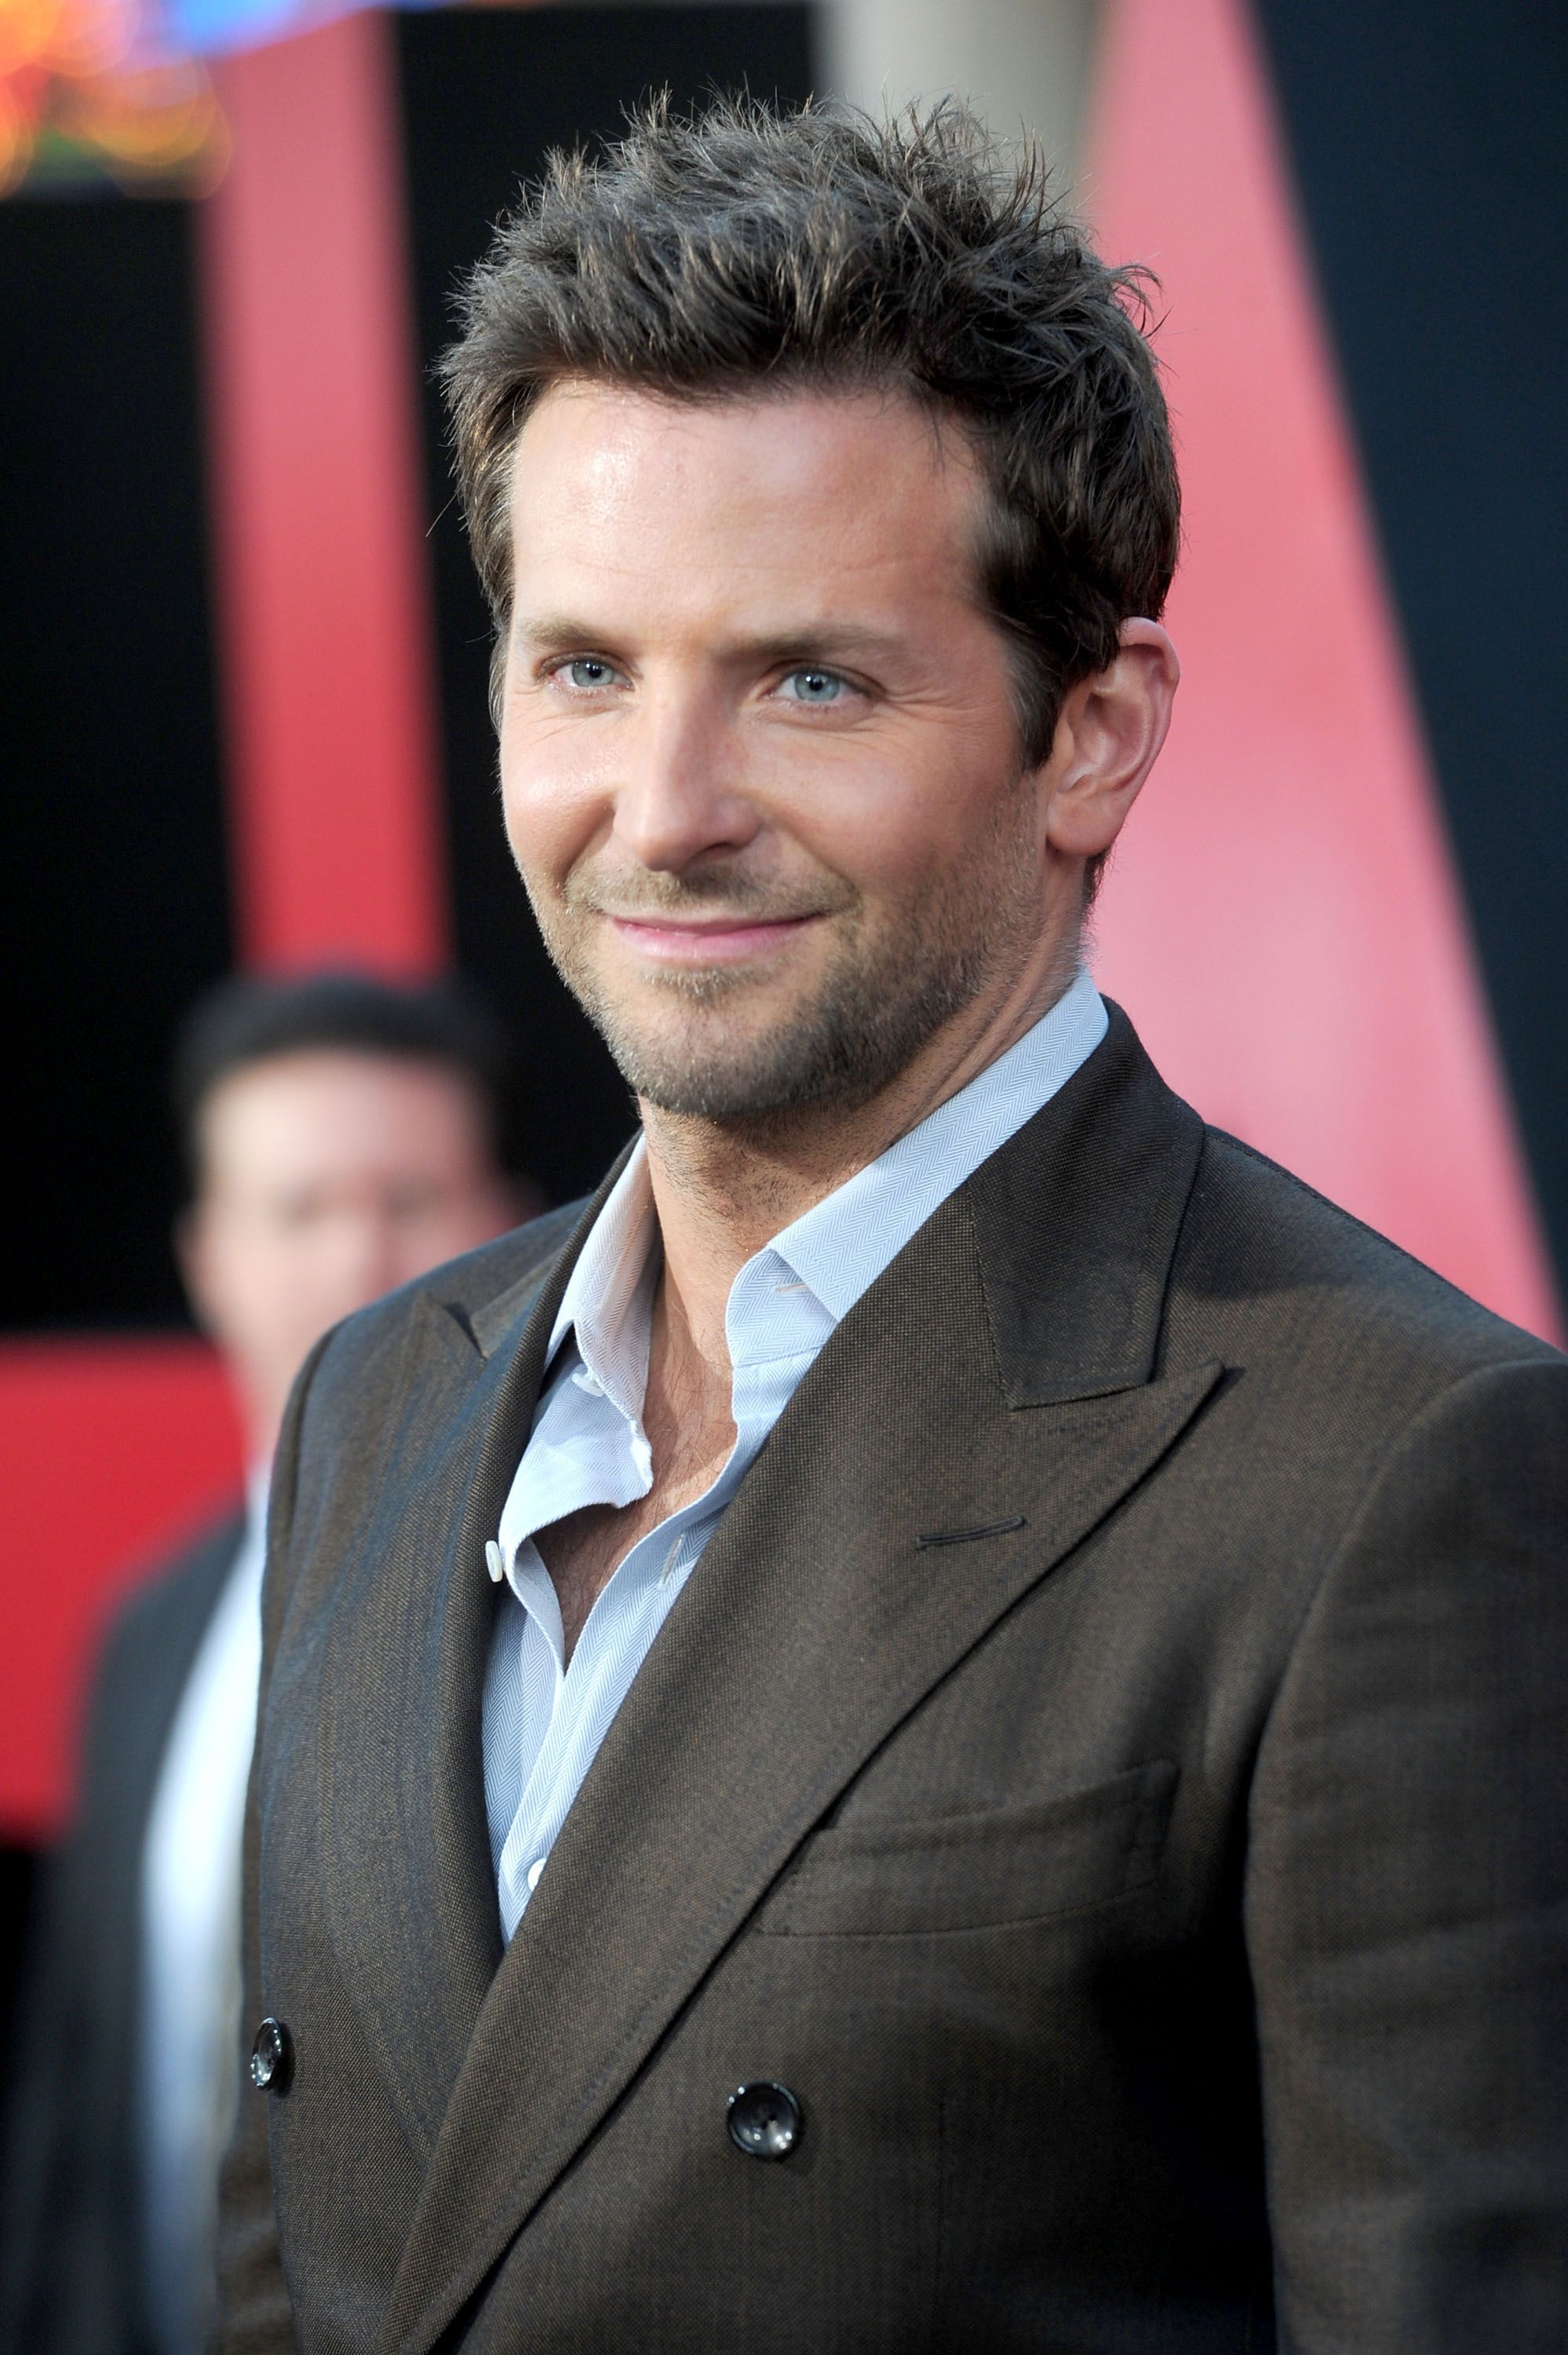 Bradley Cooper Keeps Making a Classic Suit Mistake